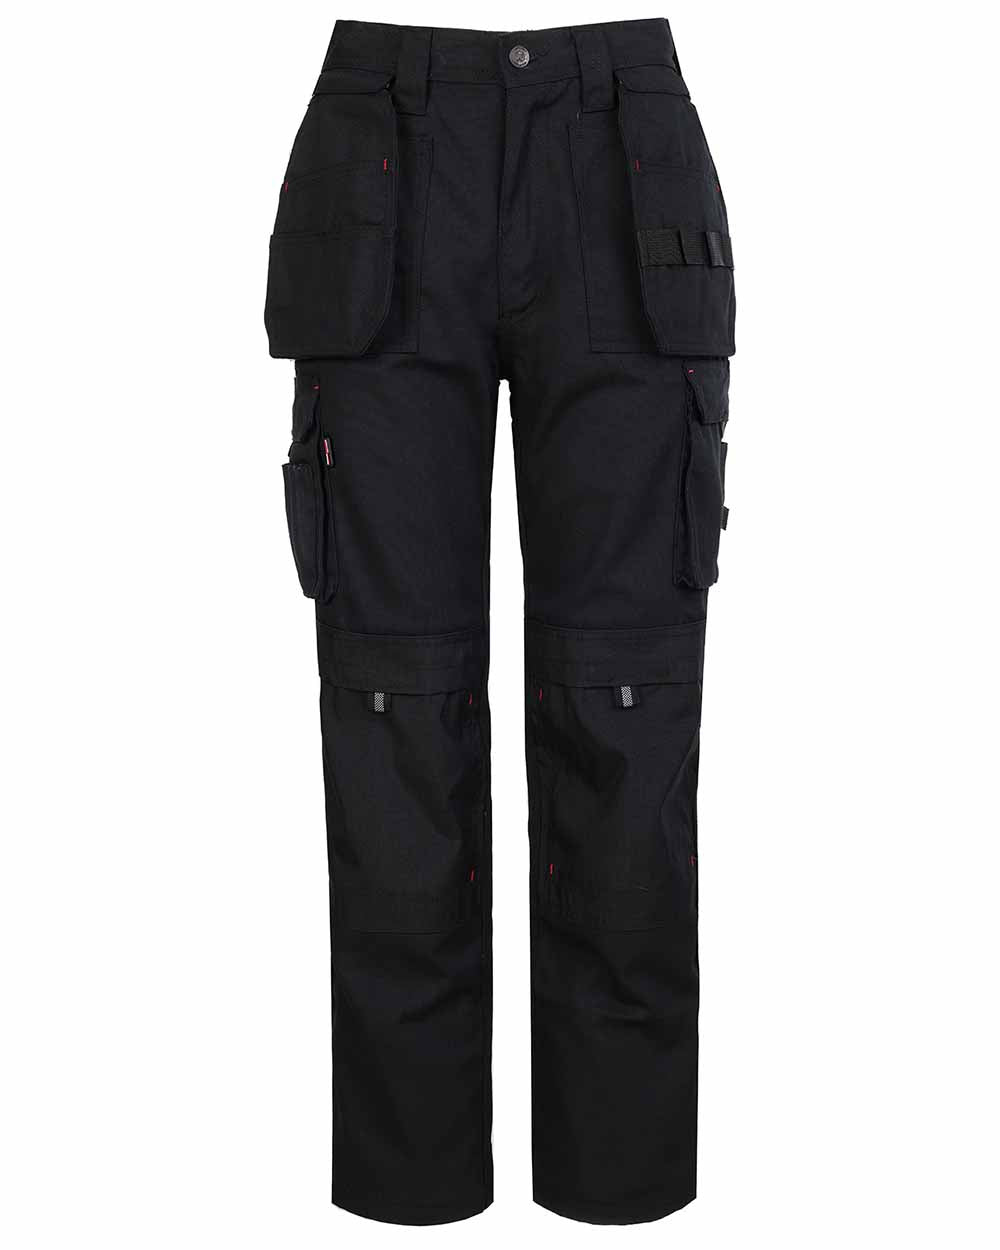 TuffStuff Extreme Work Trousers in Black 